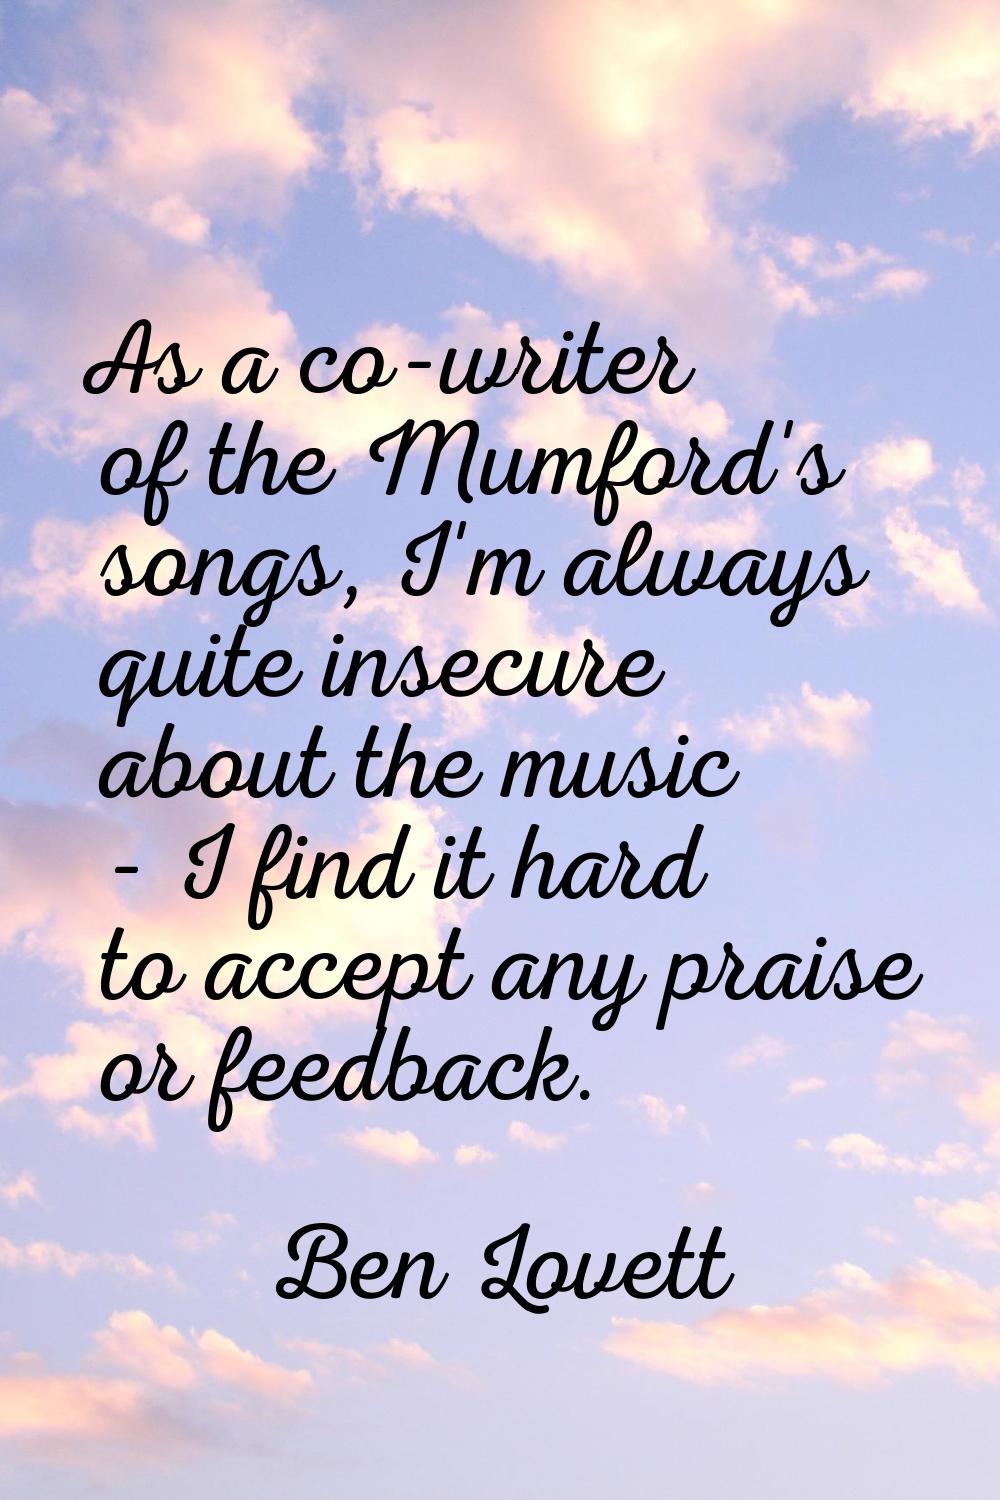 As a co-writer of the Mumford's songs, I'm always quite insecure about the music - I find it hard t